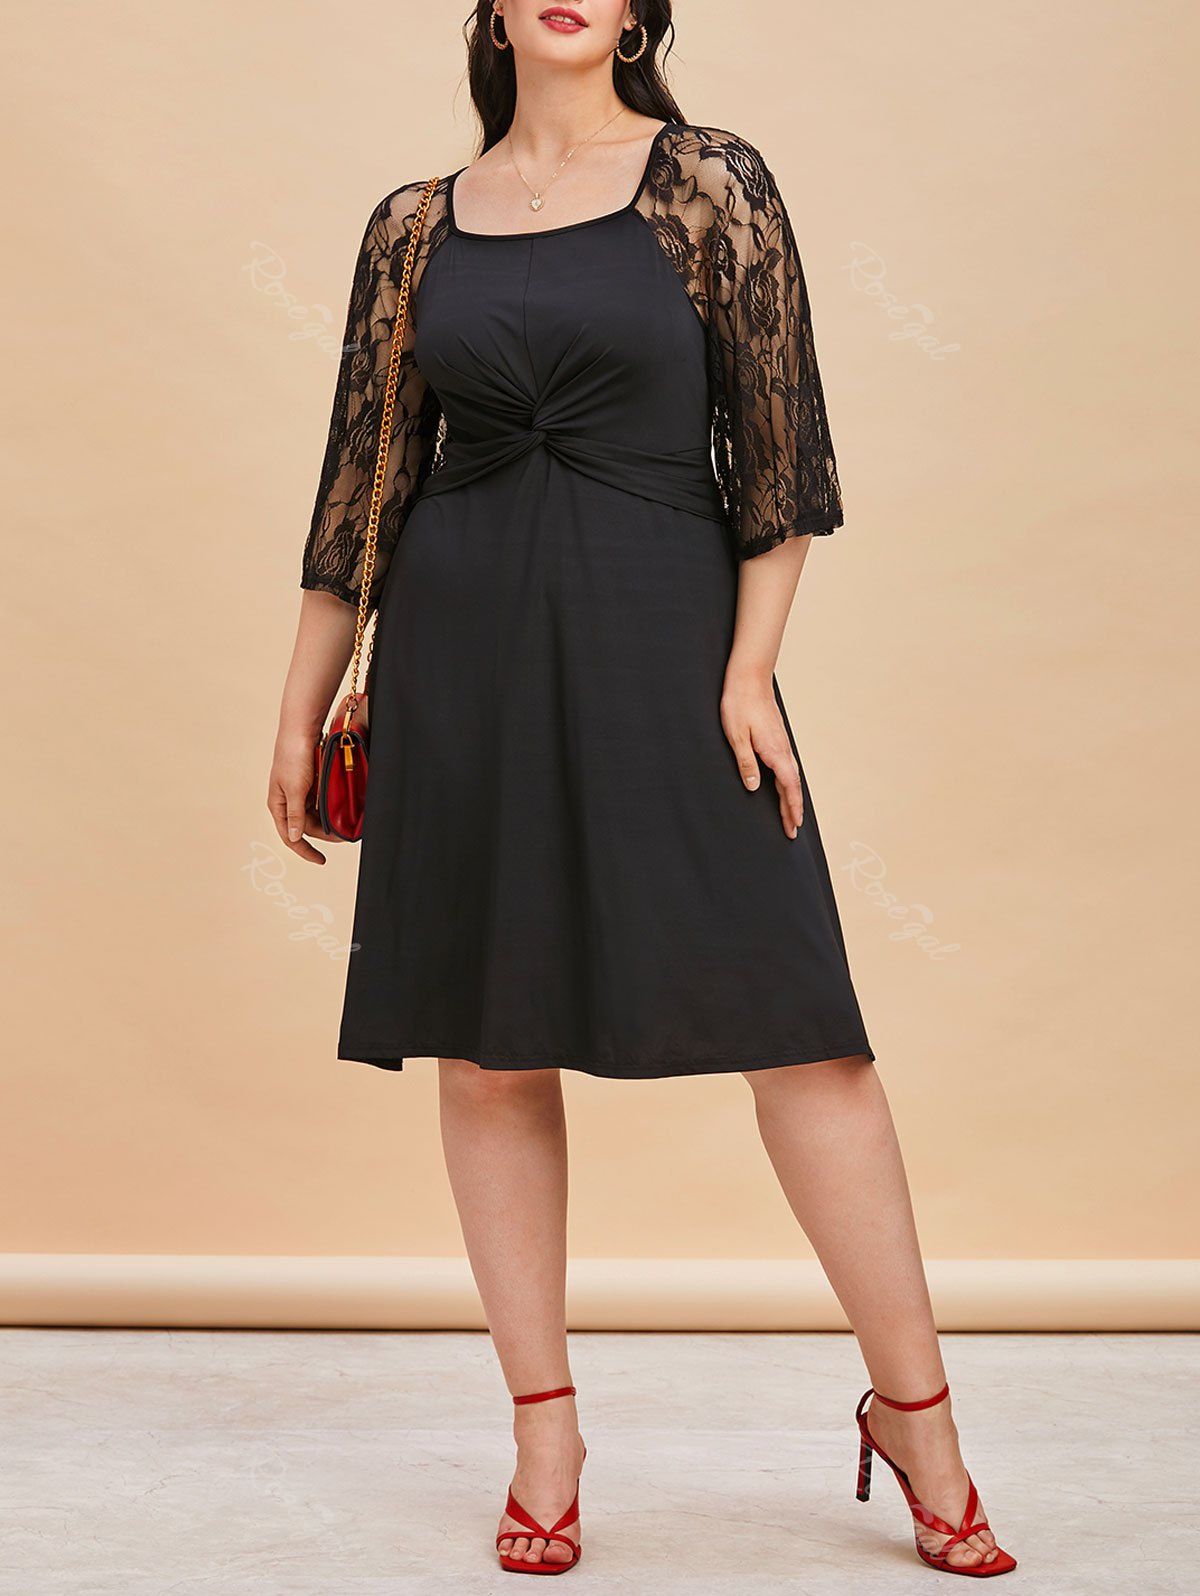 Rosegal Plus Size Twisted Lace Panel See Thru Dress